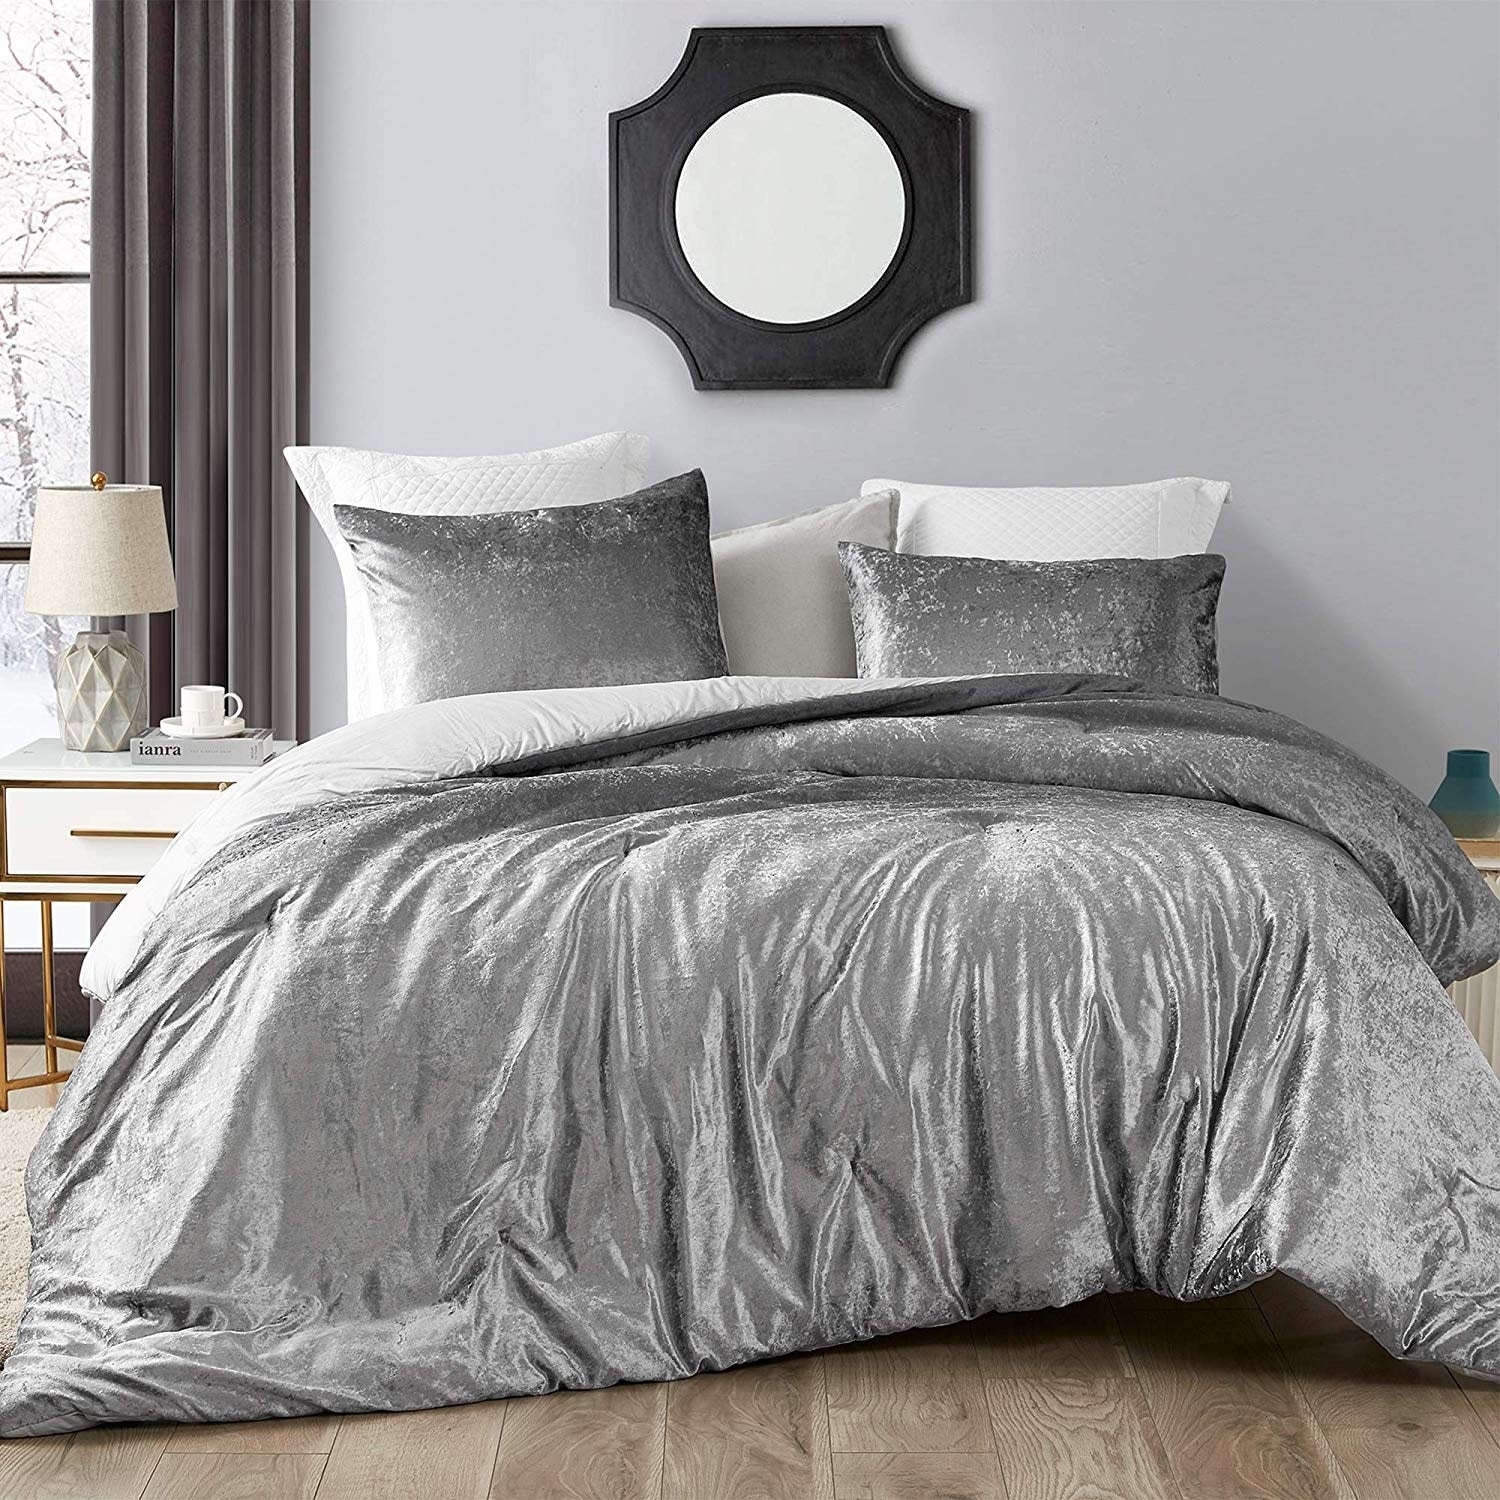 High Quality Dorm Bedding - The Original Plush Coma Inducer Living Coral  Twin XL Comforter with Velvet Pillow Shams